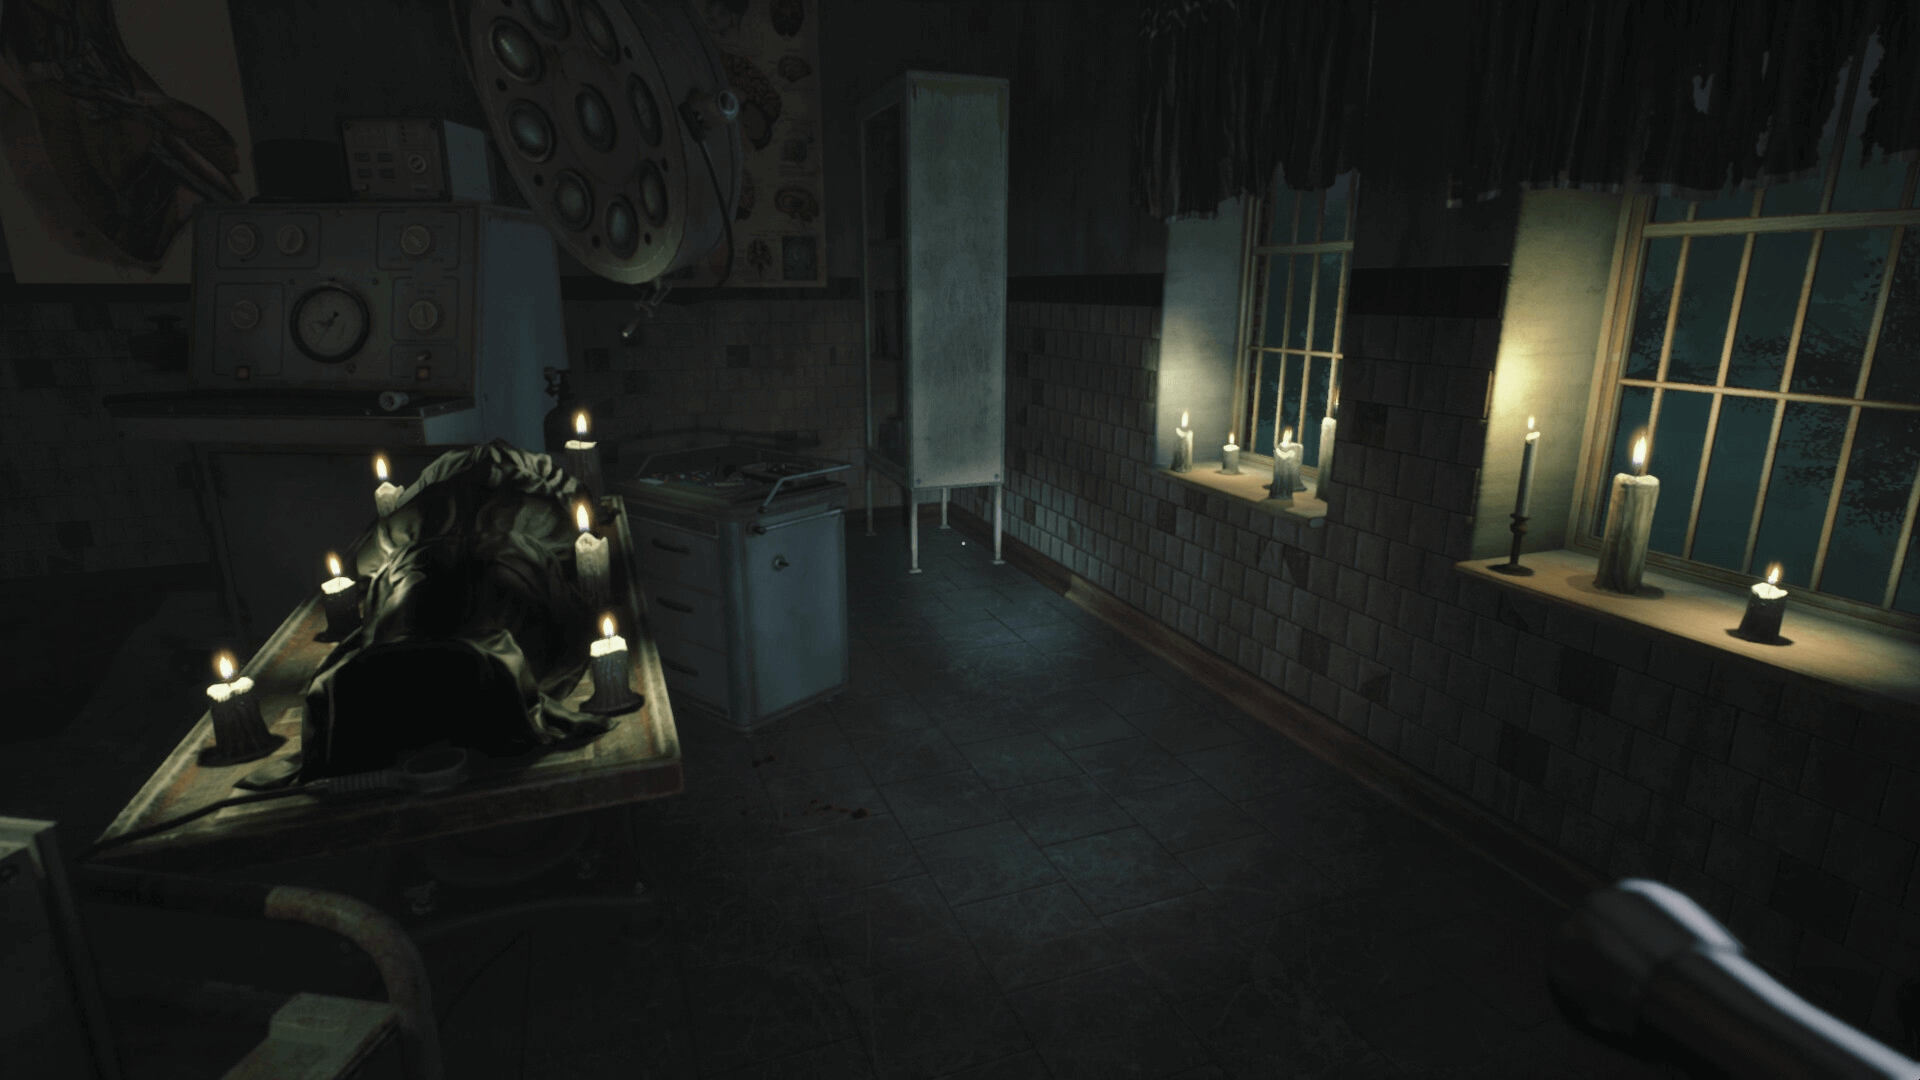 First Person Puzzle Horror Coming Soon To PlayStation, Xbox And PC